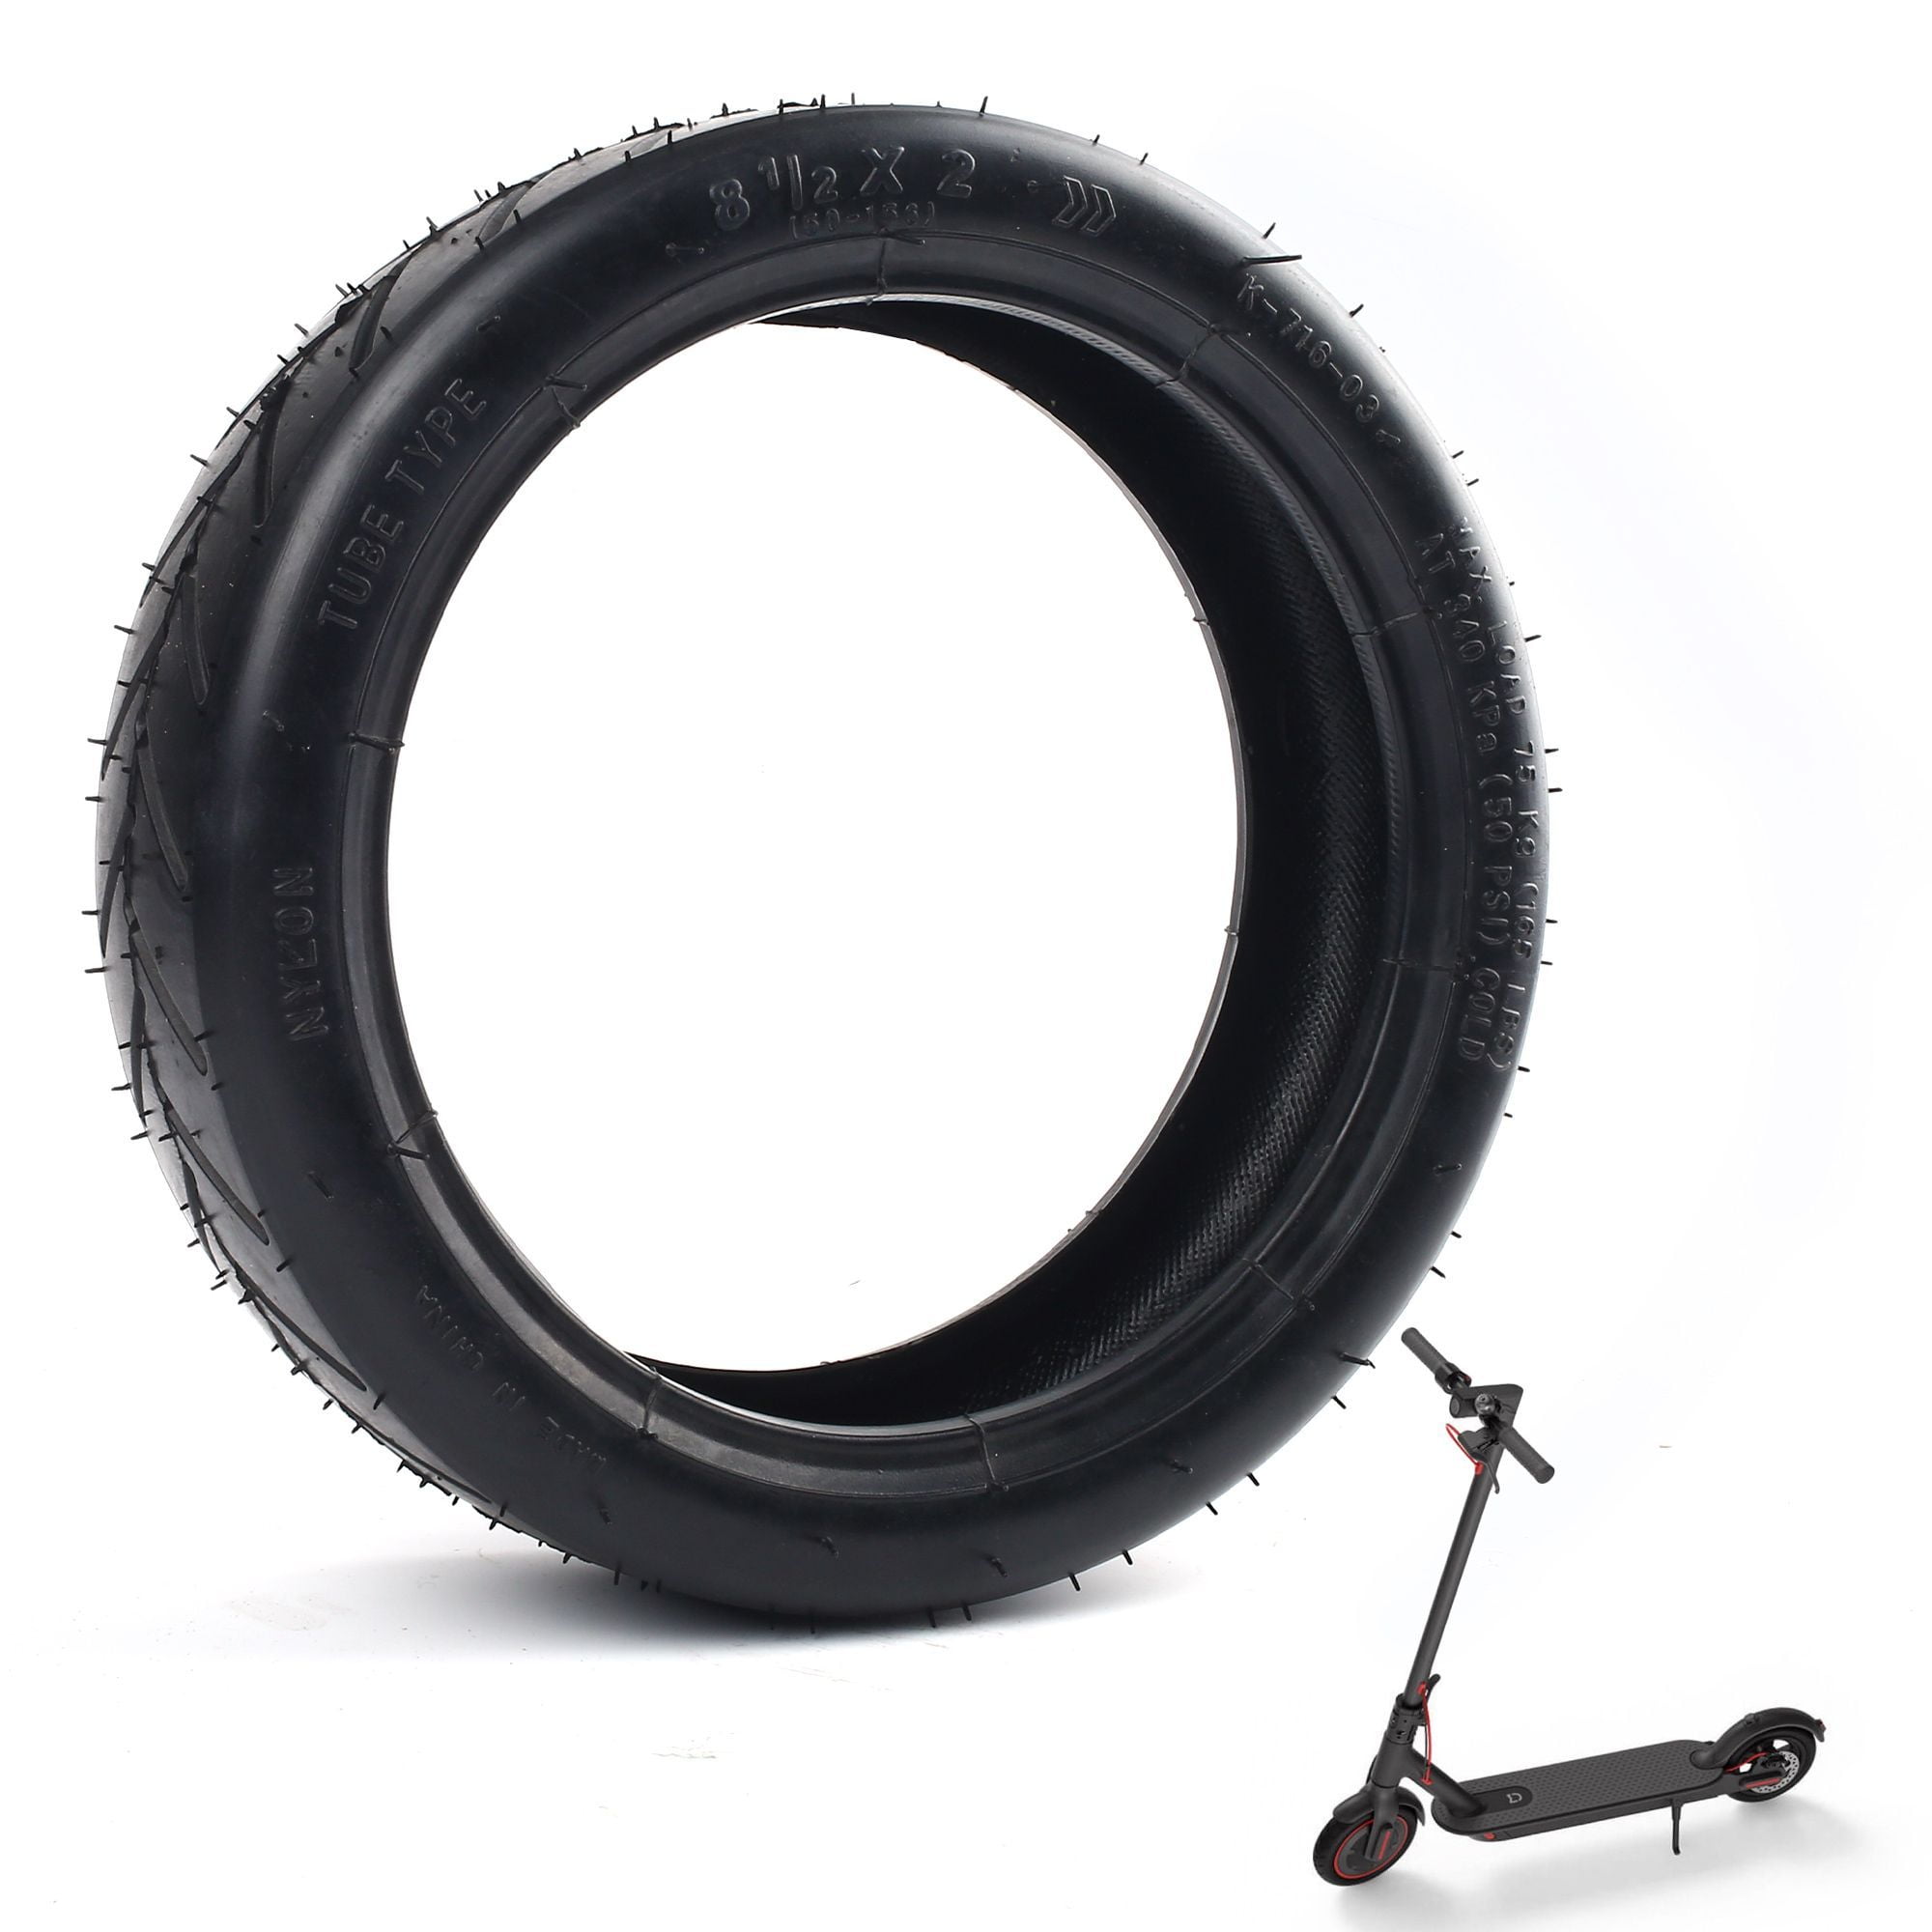 8.5 Inches Electric Scooter Tires 50/75-6.1 Compatible for Gotrax Gxl  V2/Xiaomi M365/Pro/1S Electric Scooter Outer Tire 8 1/2X2 Tube Tire  Replacement